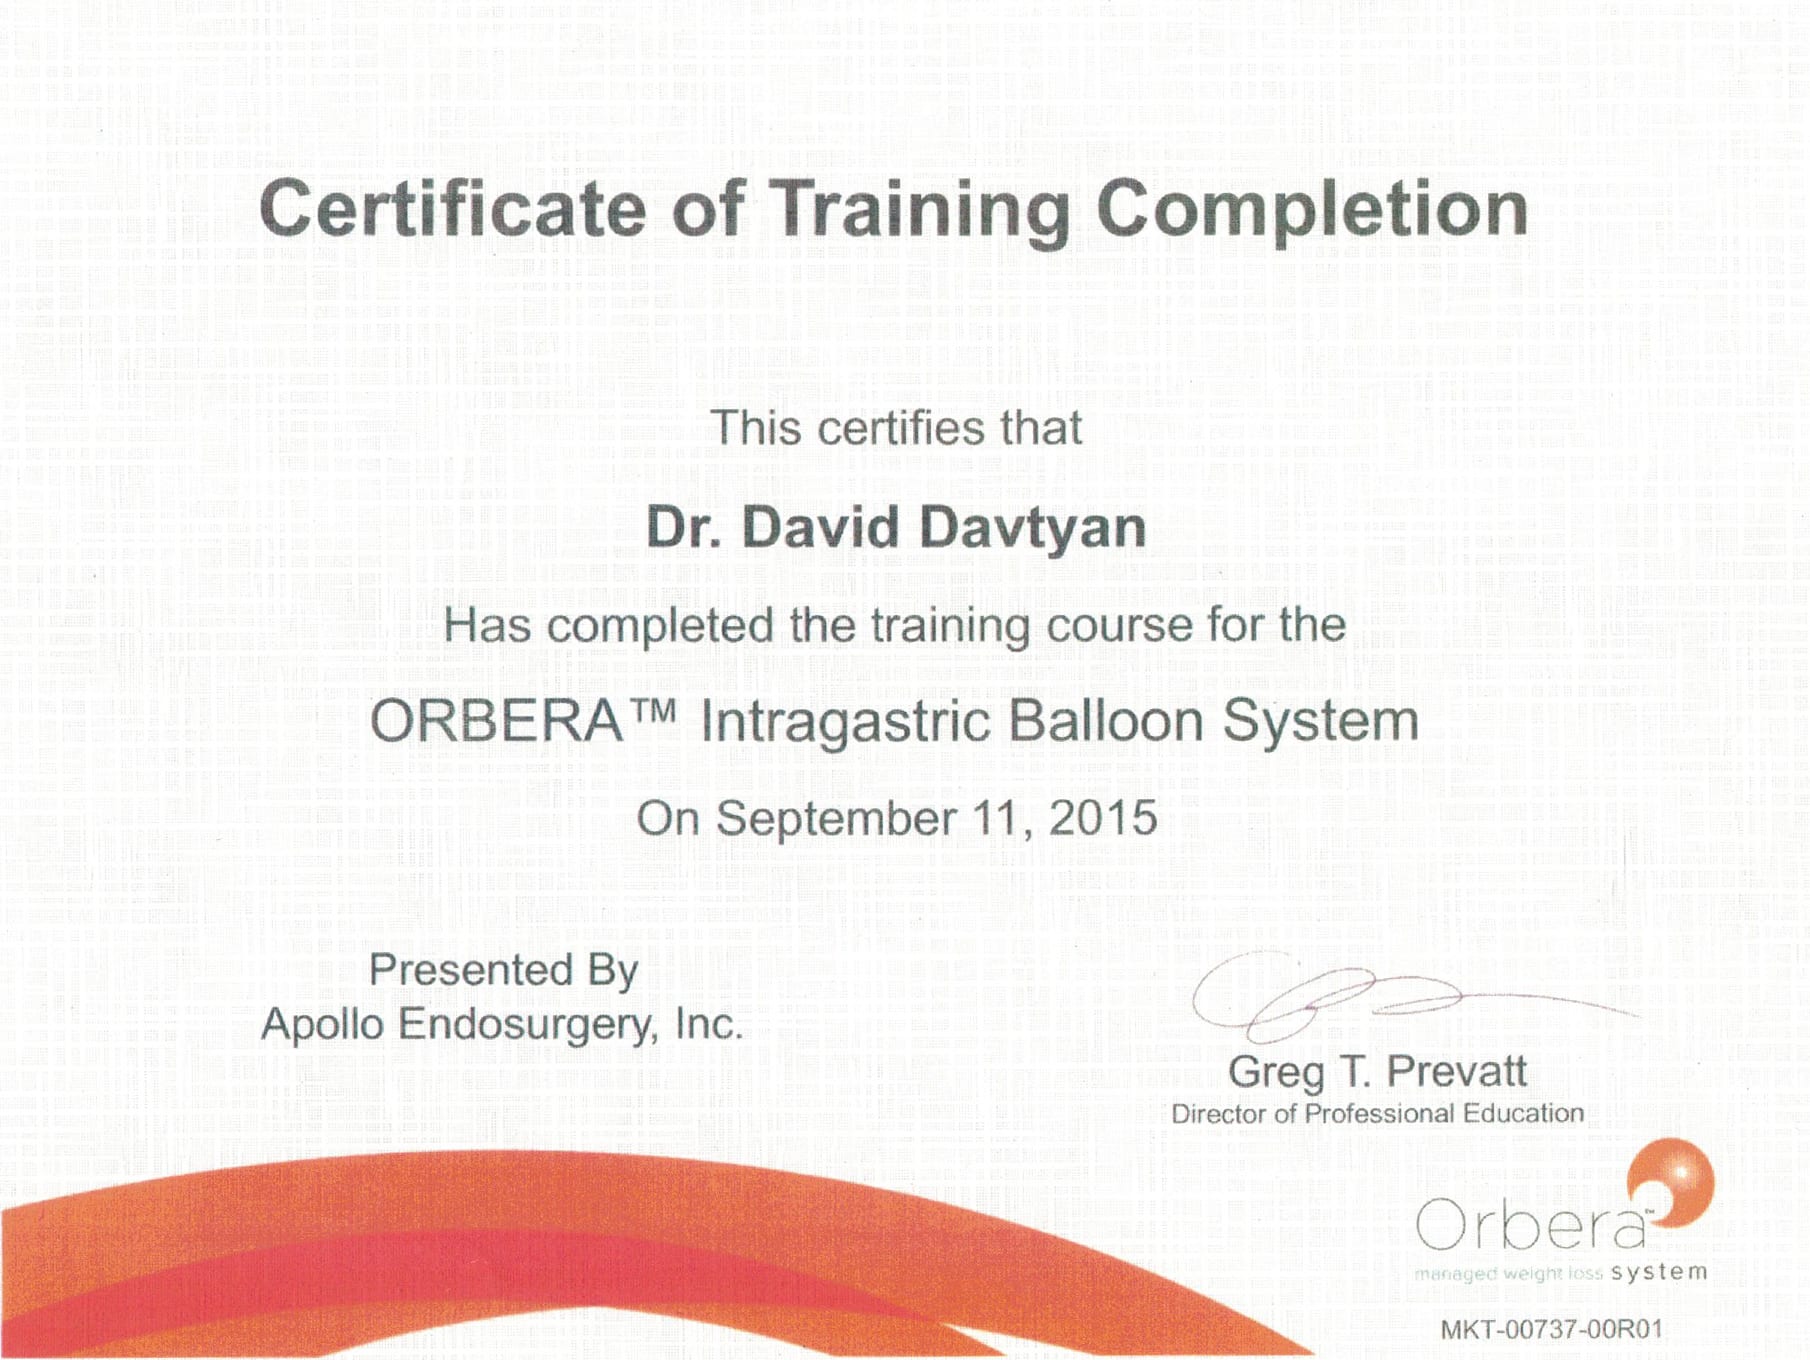 Dr. David G. Davtyan's 2015 Apollo Endosurgery, Inc. Certificate Of Training Completion Orbera Intragastric Balloon System 